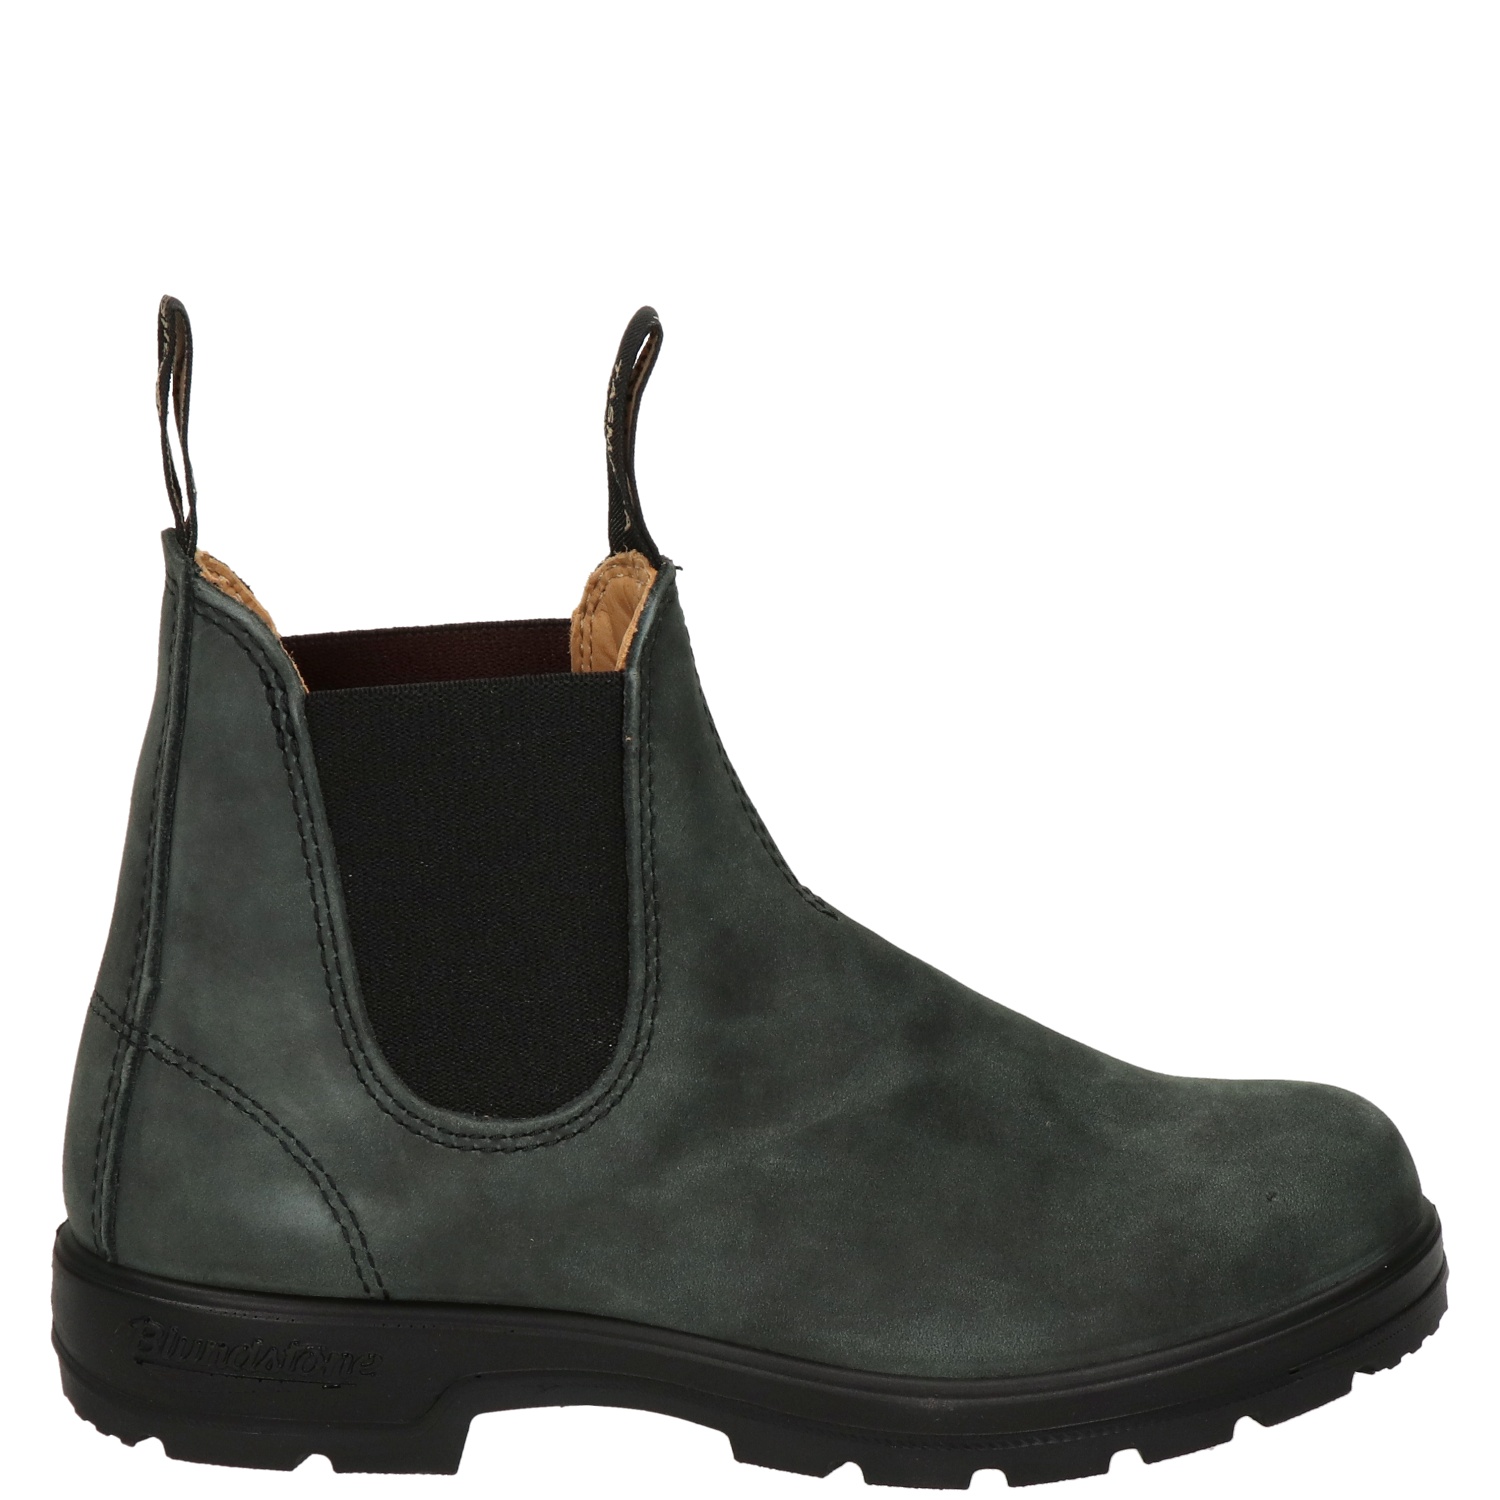 Blundstone 587 chelseaboots